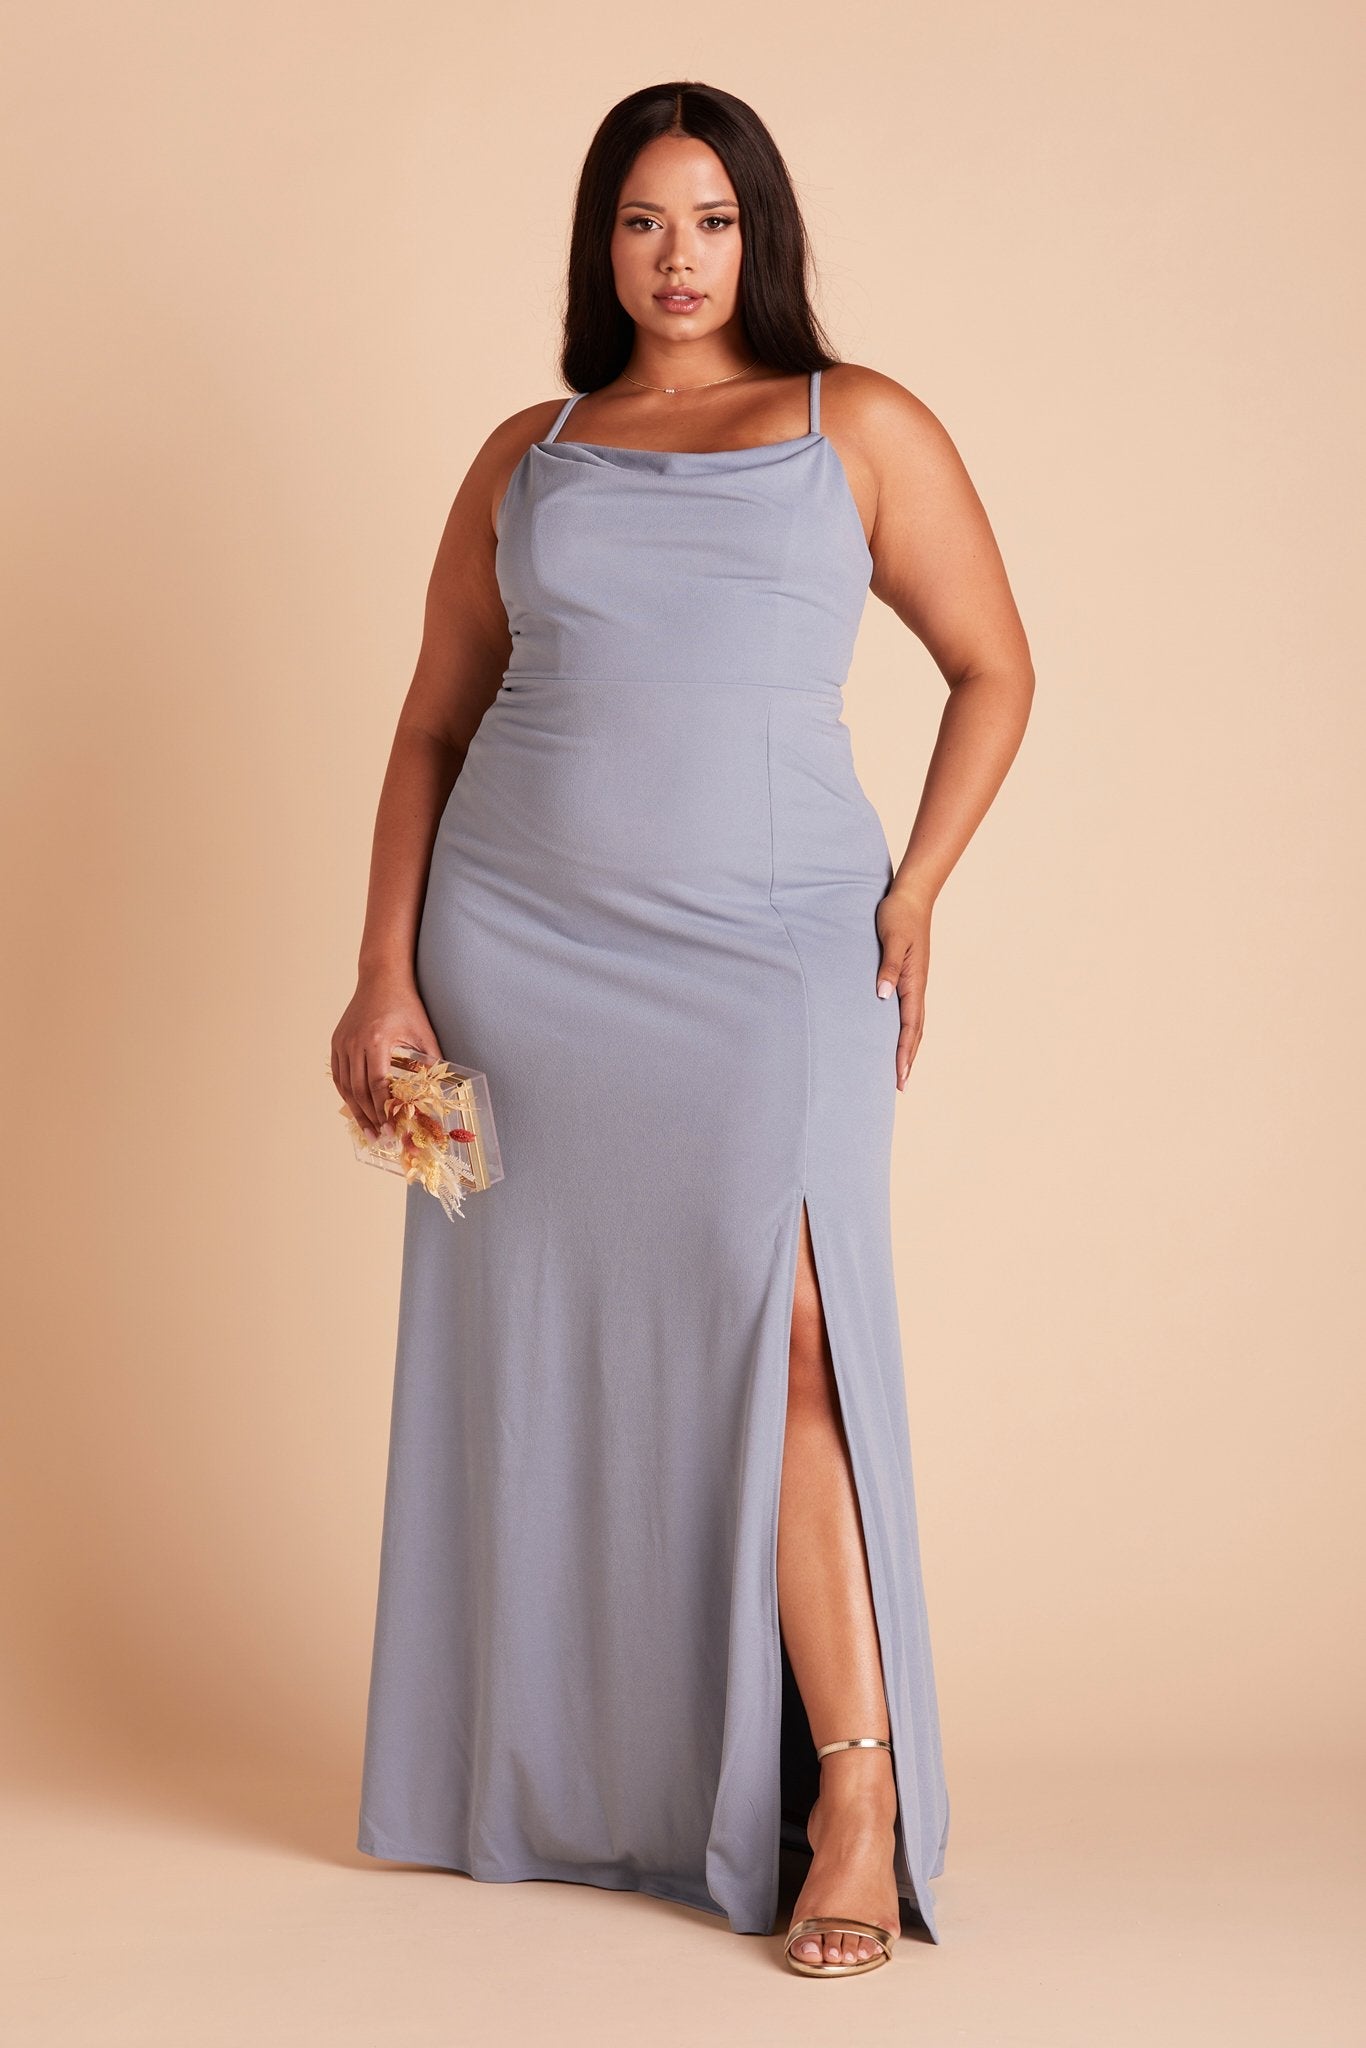 Front view of the floor-length Ash Plus Size Bridesmaid Dress in dusty blue crepe by Birdy Grey with a slightly draped cowl neck front. The flowing skirt features a slit over the front left leg.